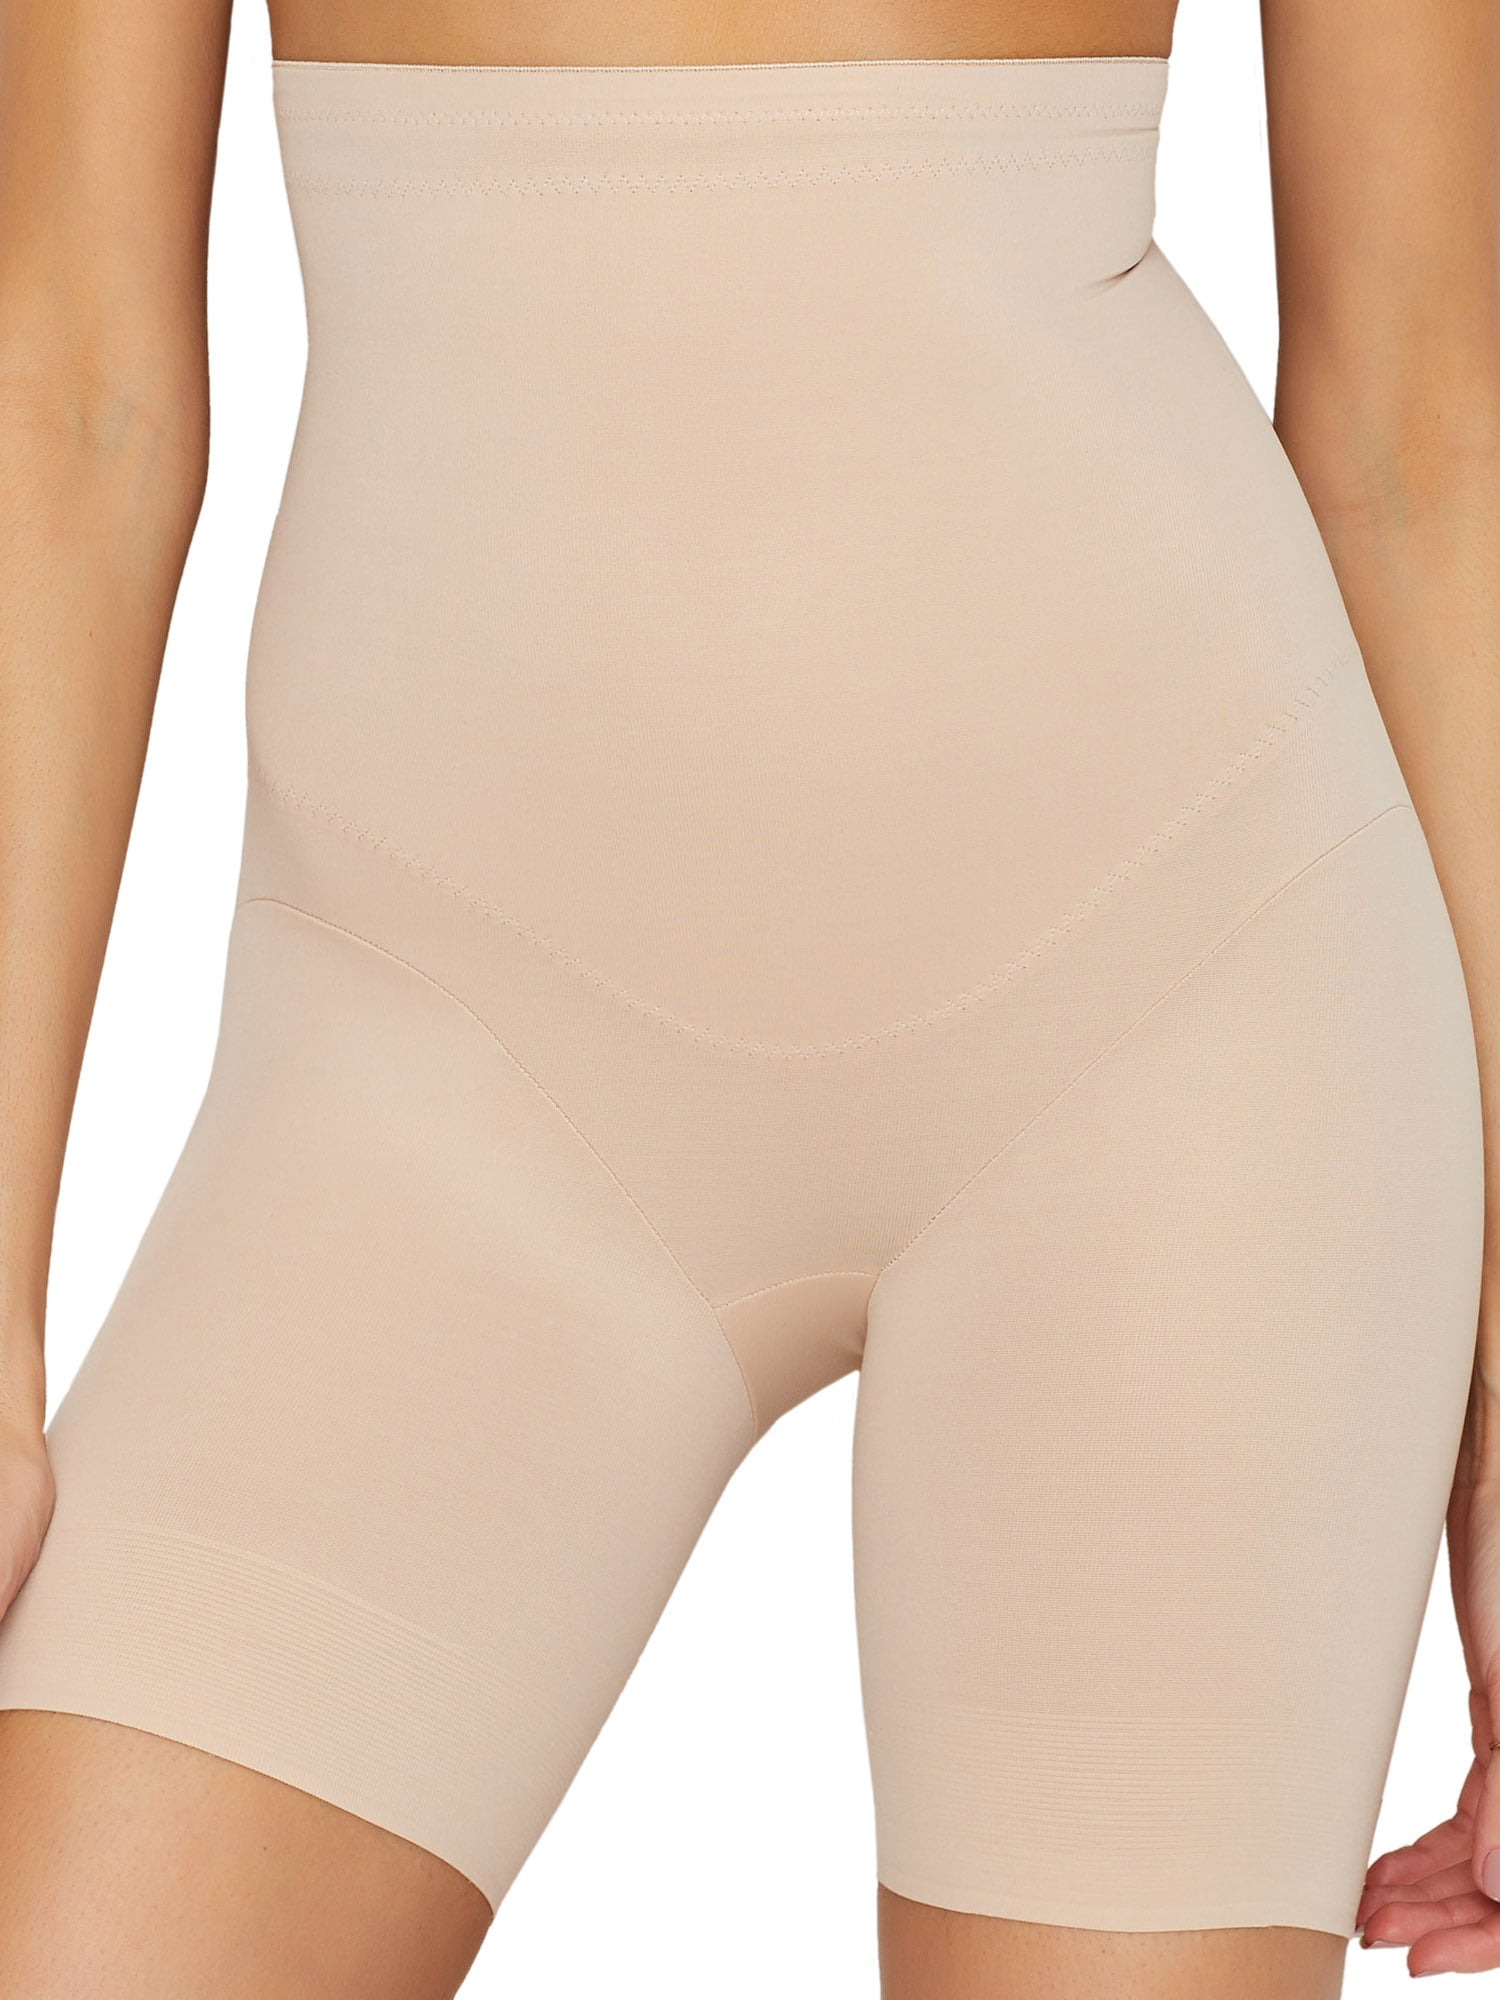 Extra Firm Control Torsette Thigh Slimmer 4093 Warm Beige - Lace & Day